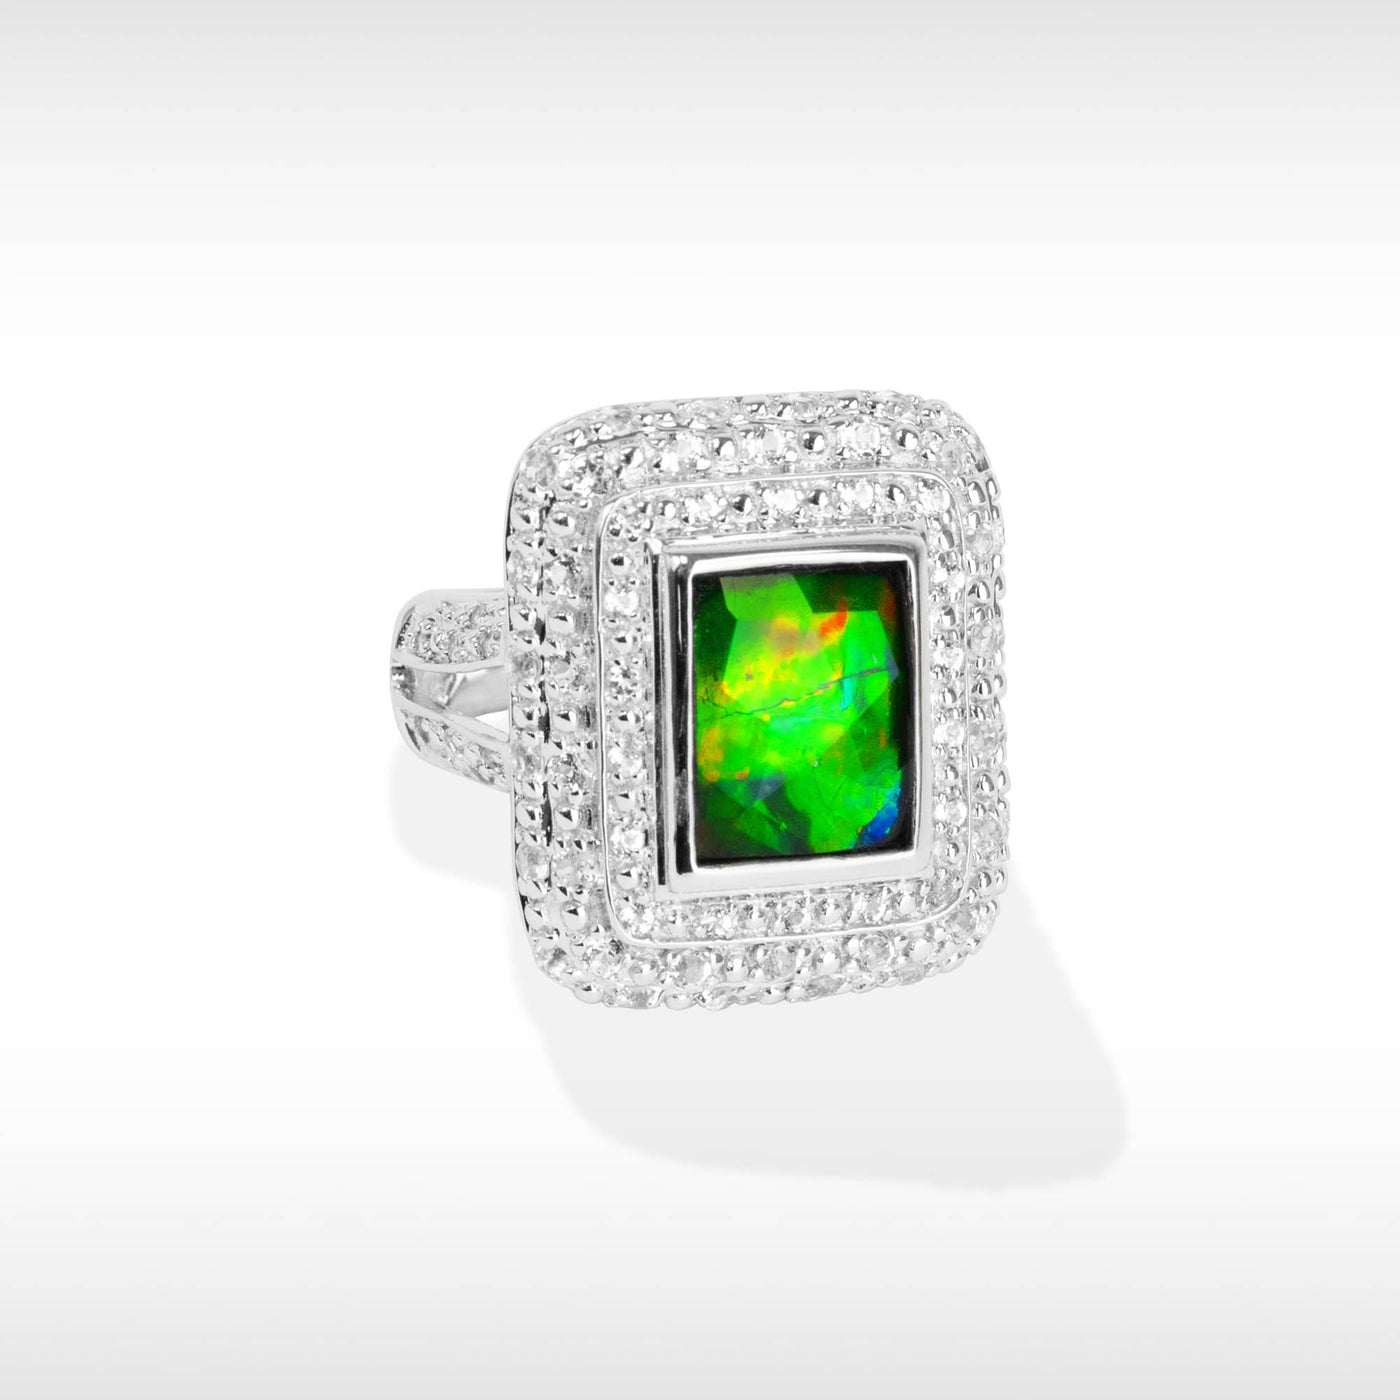 Women's Sterling Silver Ammolite Ring with White Topaz Accent